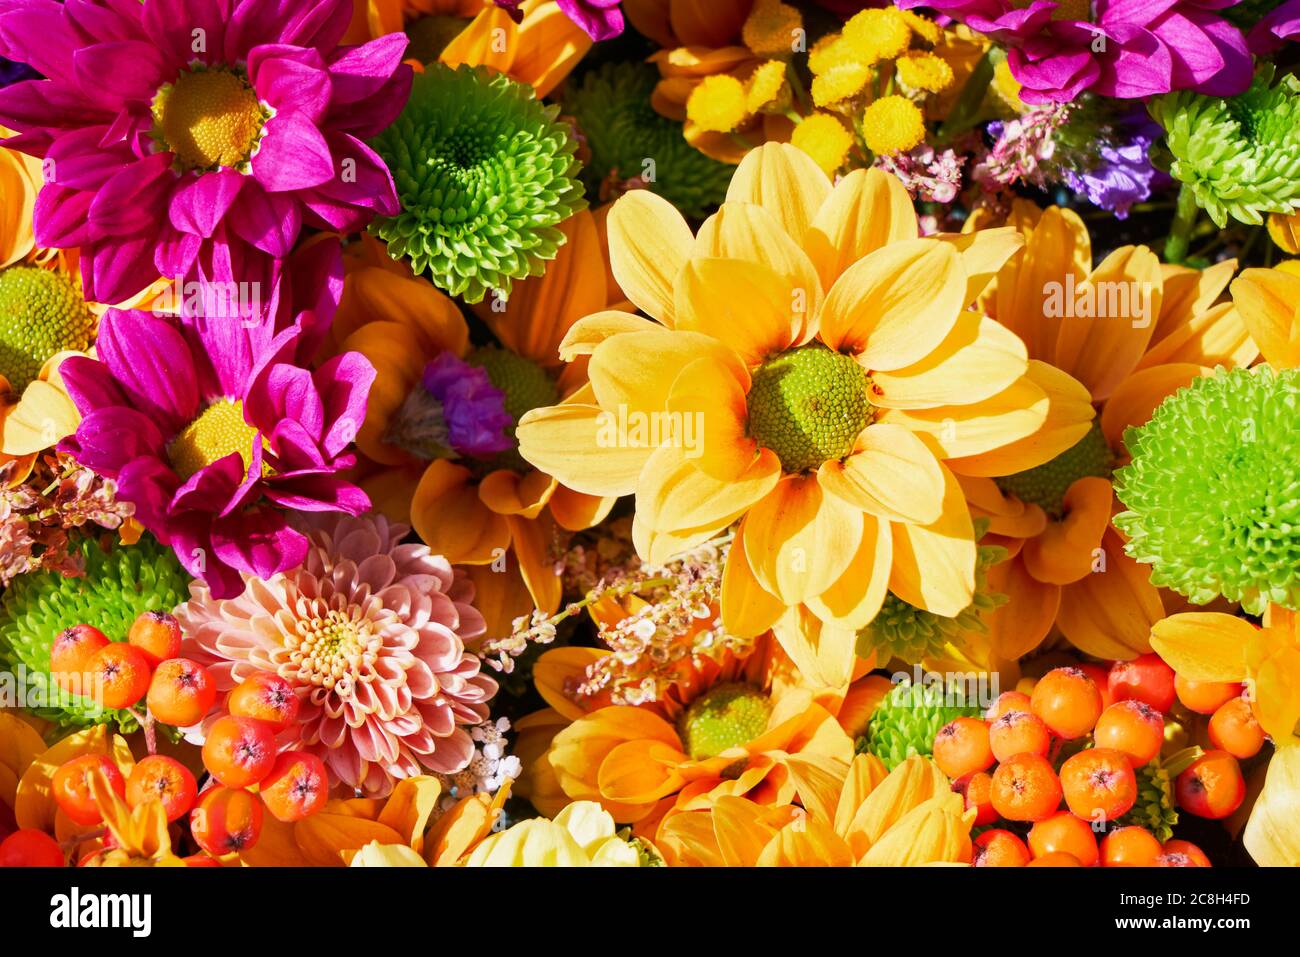 Beautiful autumnal purple and yellow flowers background. Colorful chrysanthemum flowers. Top view Stock Photo